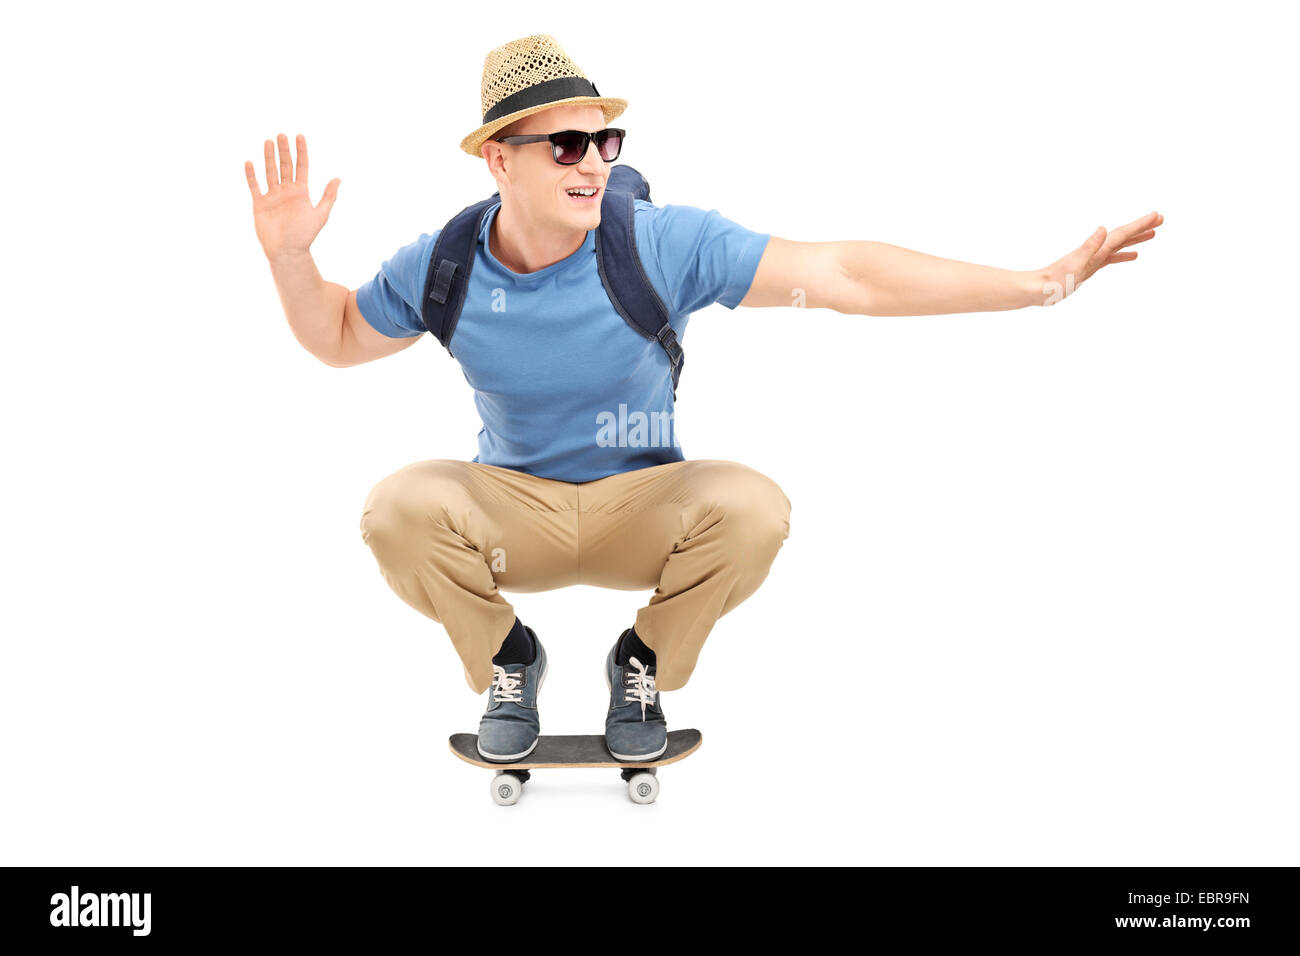 Cool young man riding a small skateboard isolated on white background Stock Photo